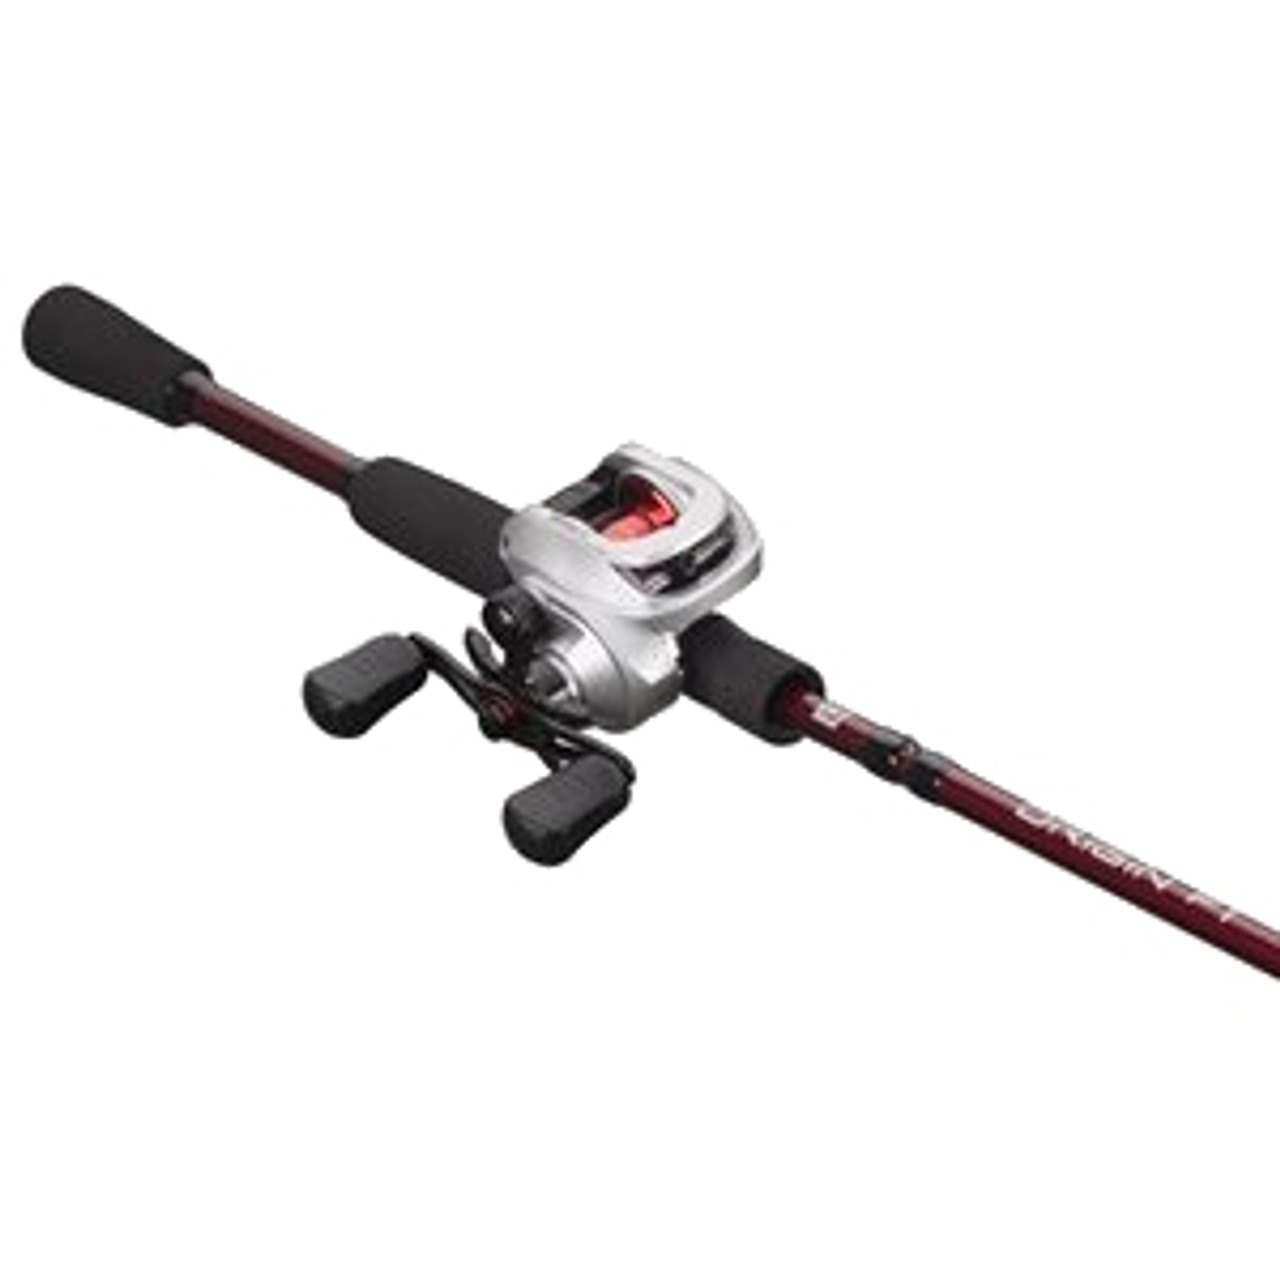 13 Fishing Source F1 7'1 Medium Spinning Combo/ COMES WITH / FREE CAP  /FREE FISH LINE - Bronson